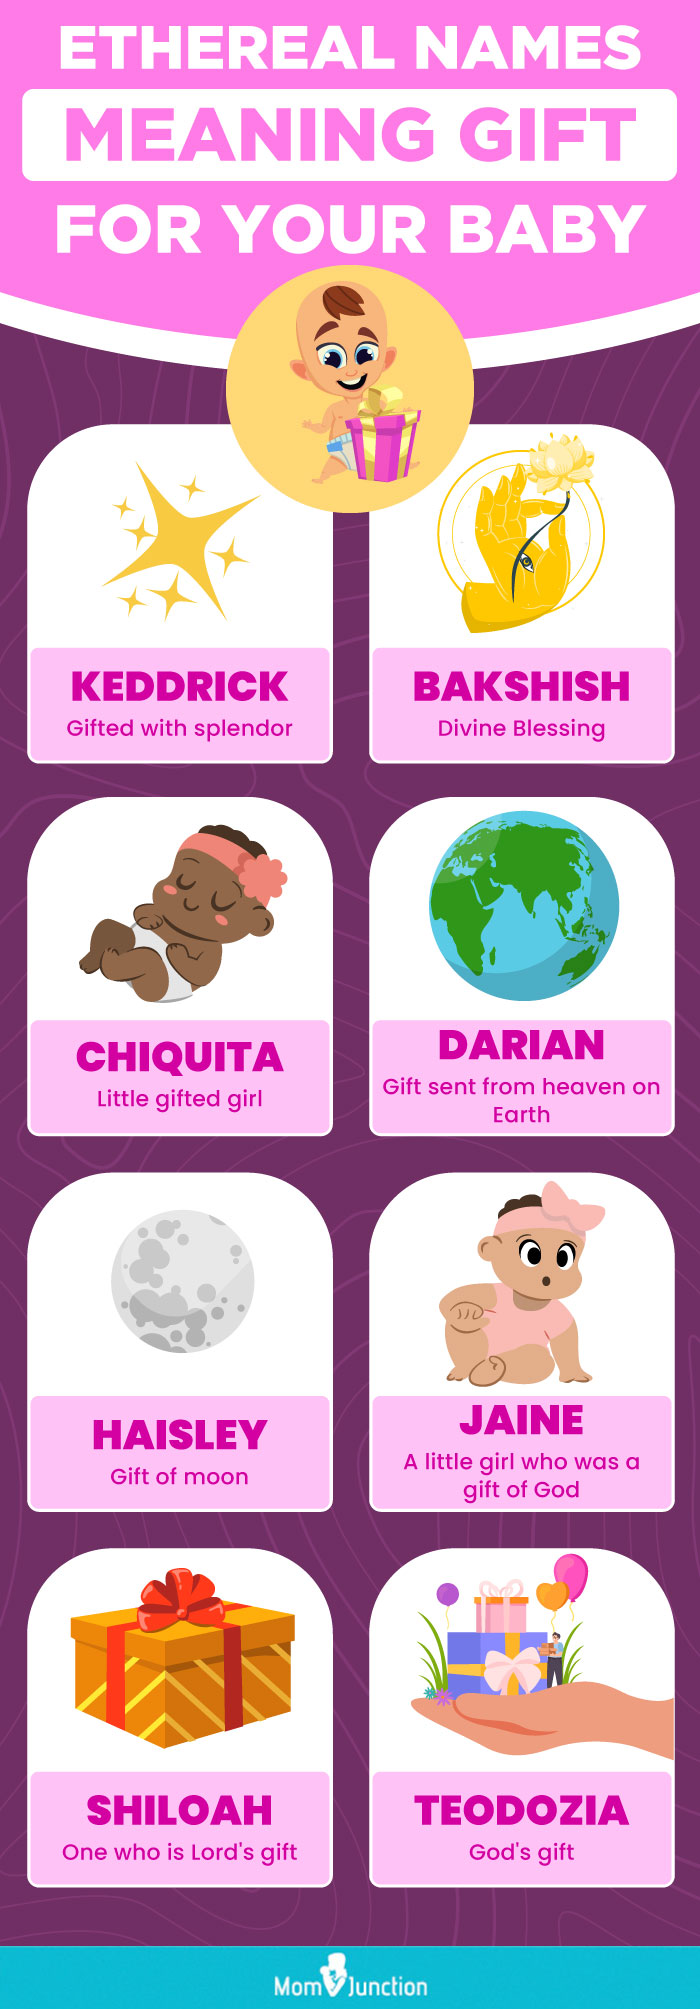 ethereal names meaning gift for your baby (infographic)